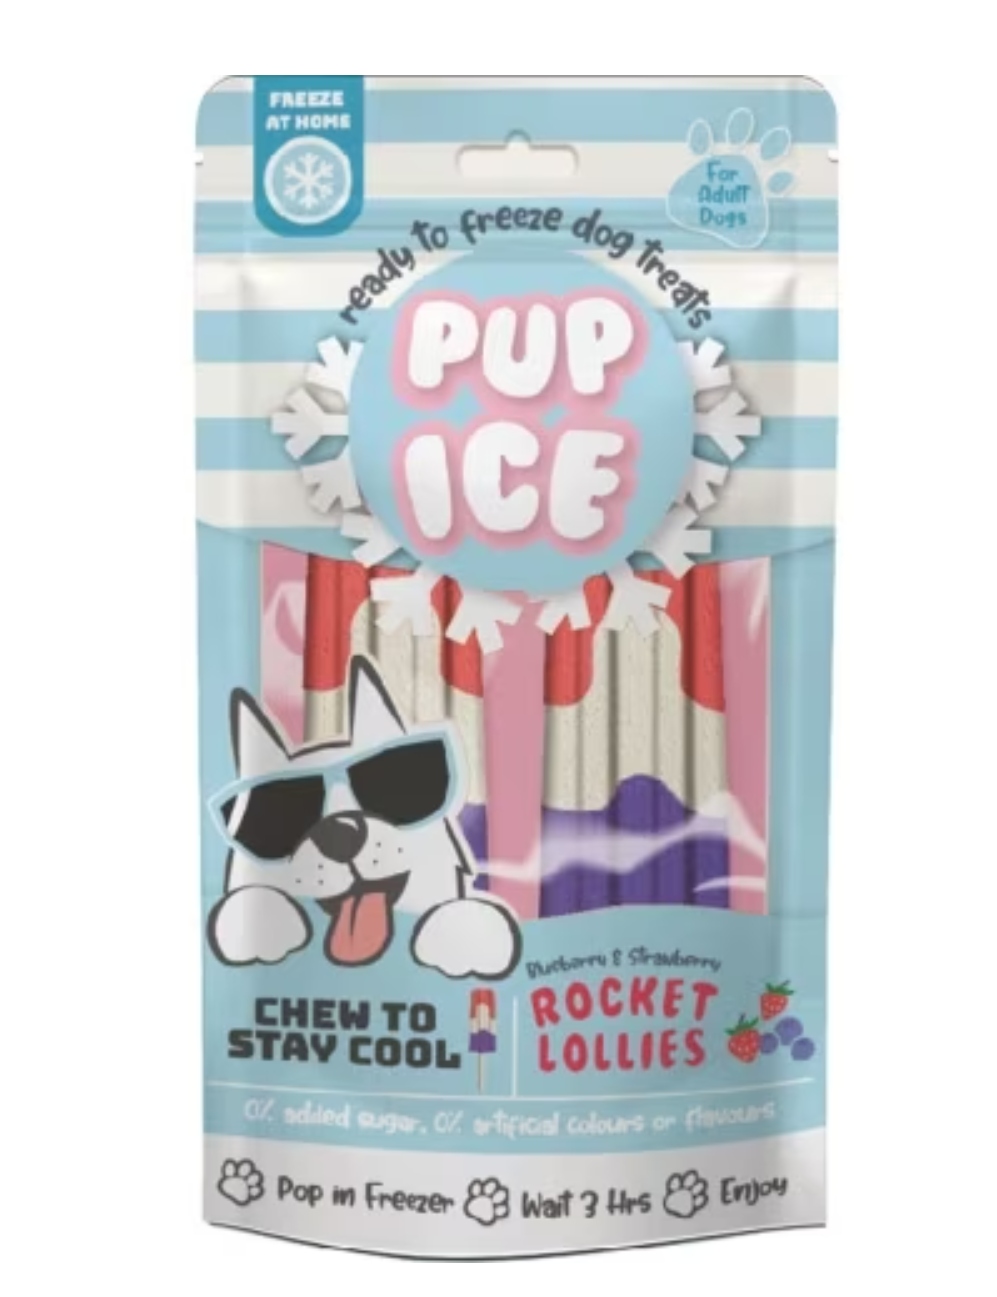 Ethical Pet Pup Ice Rocket Lollies - Strawberry Blueberry 2pk